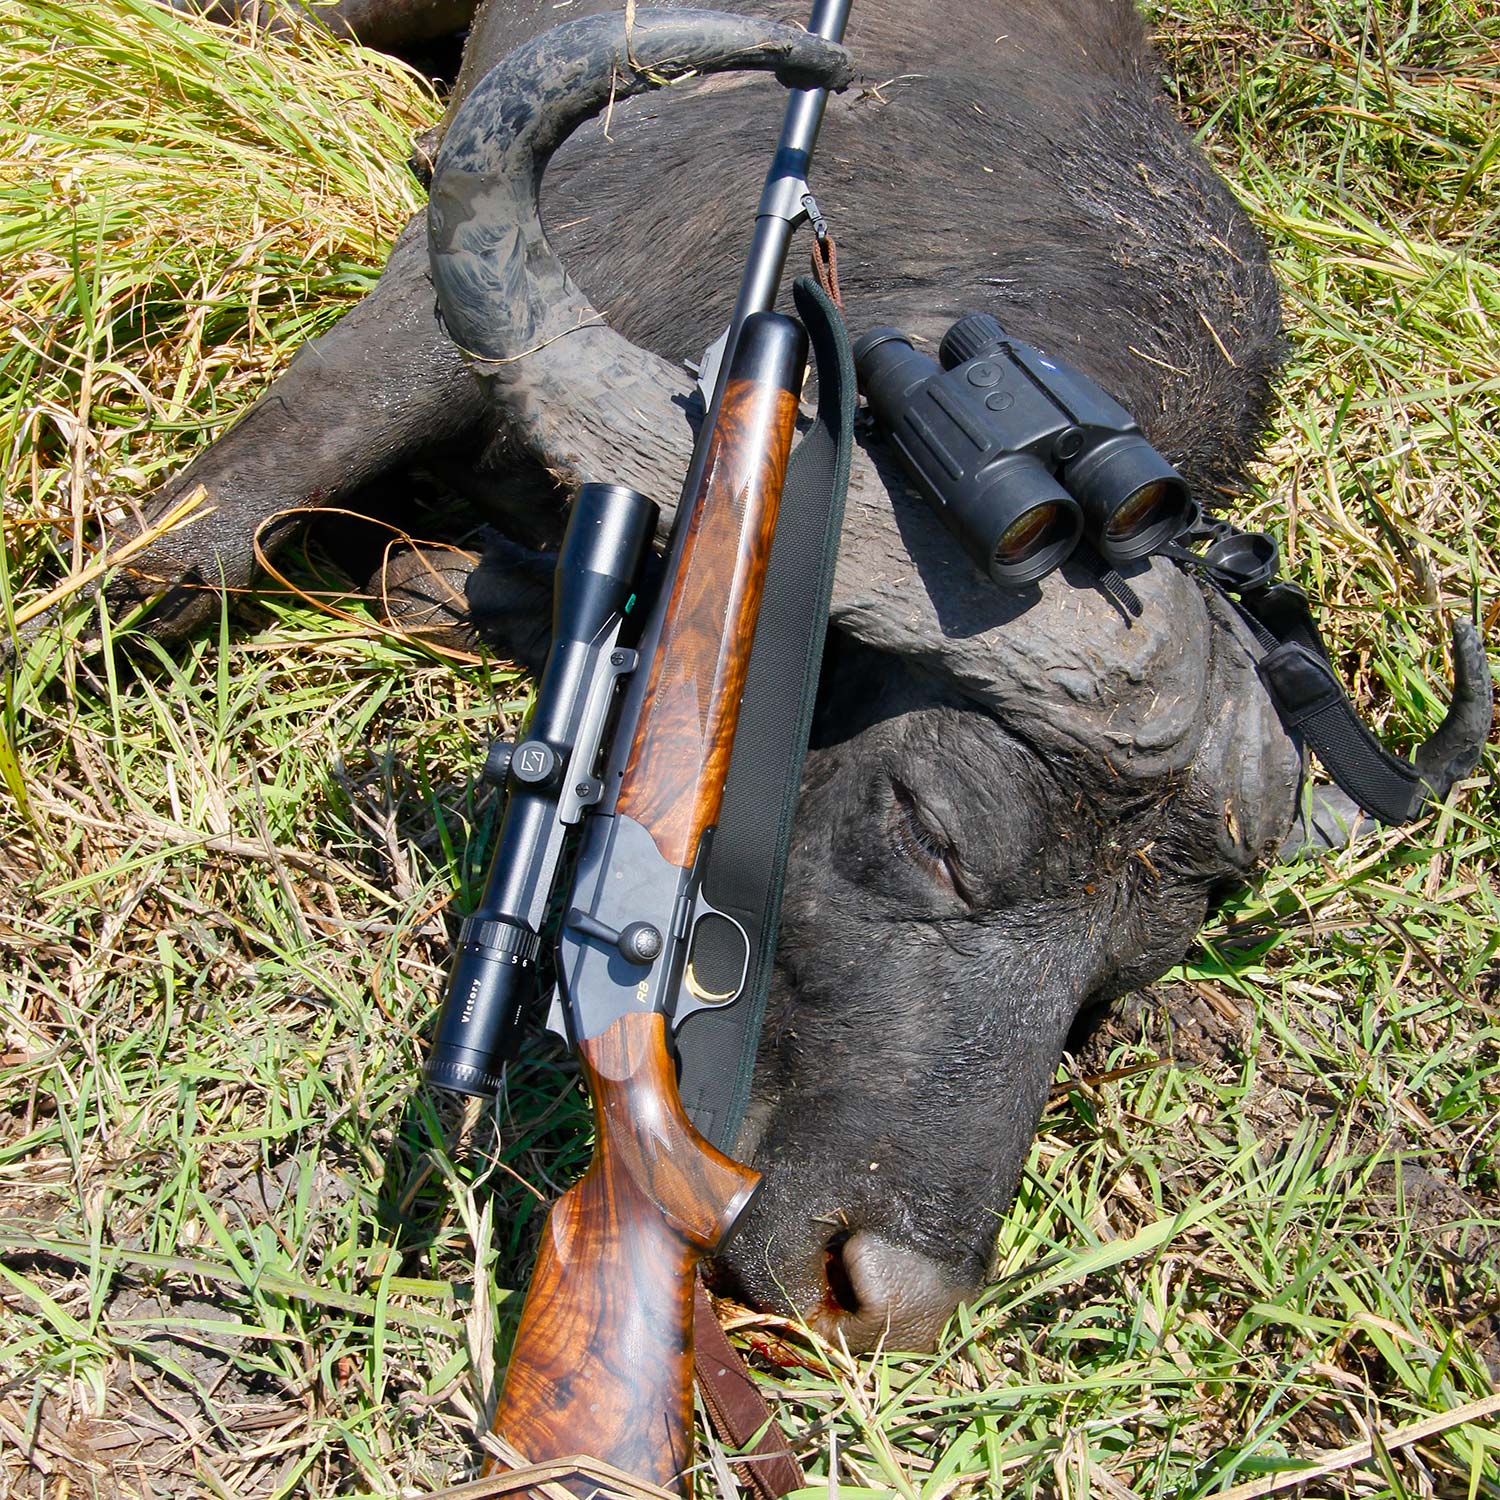 A hunting rifle leaning next to a hunted buffalo on the ground.